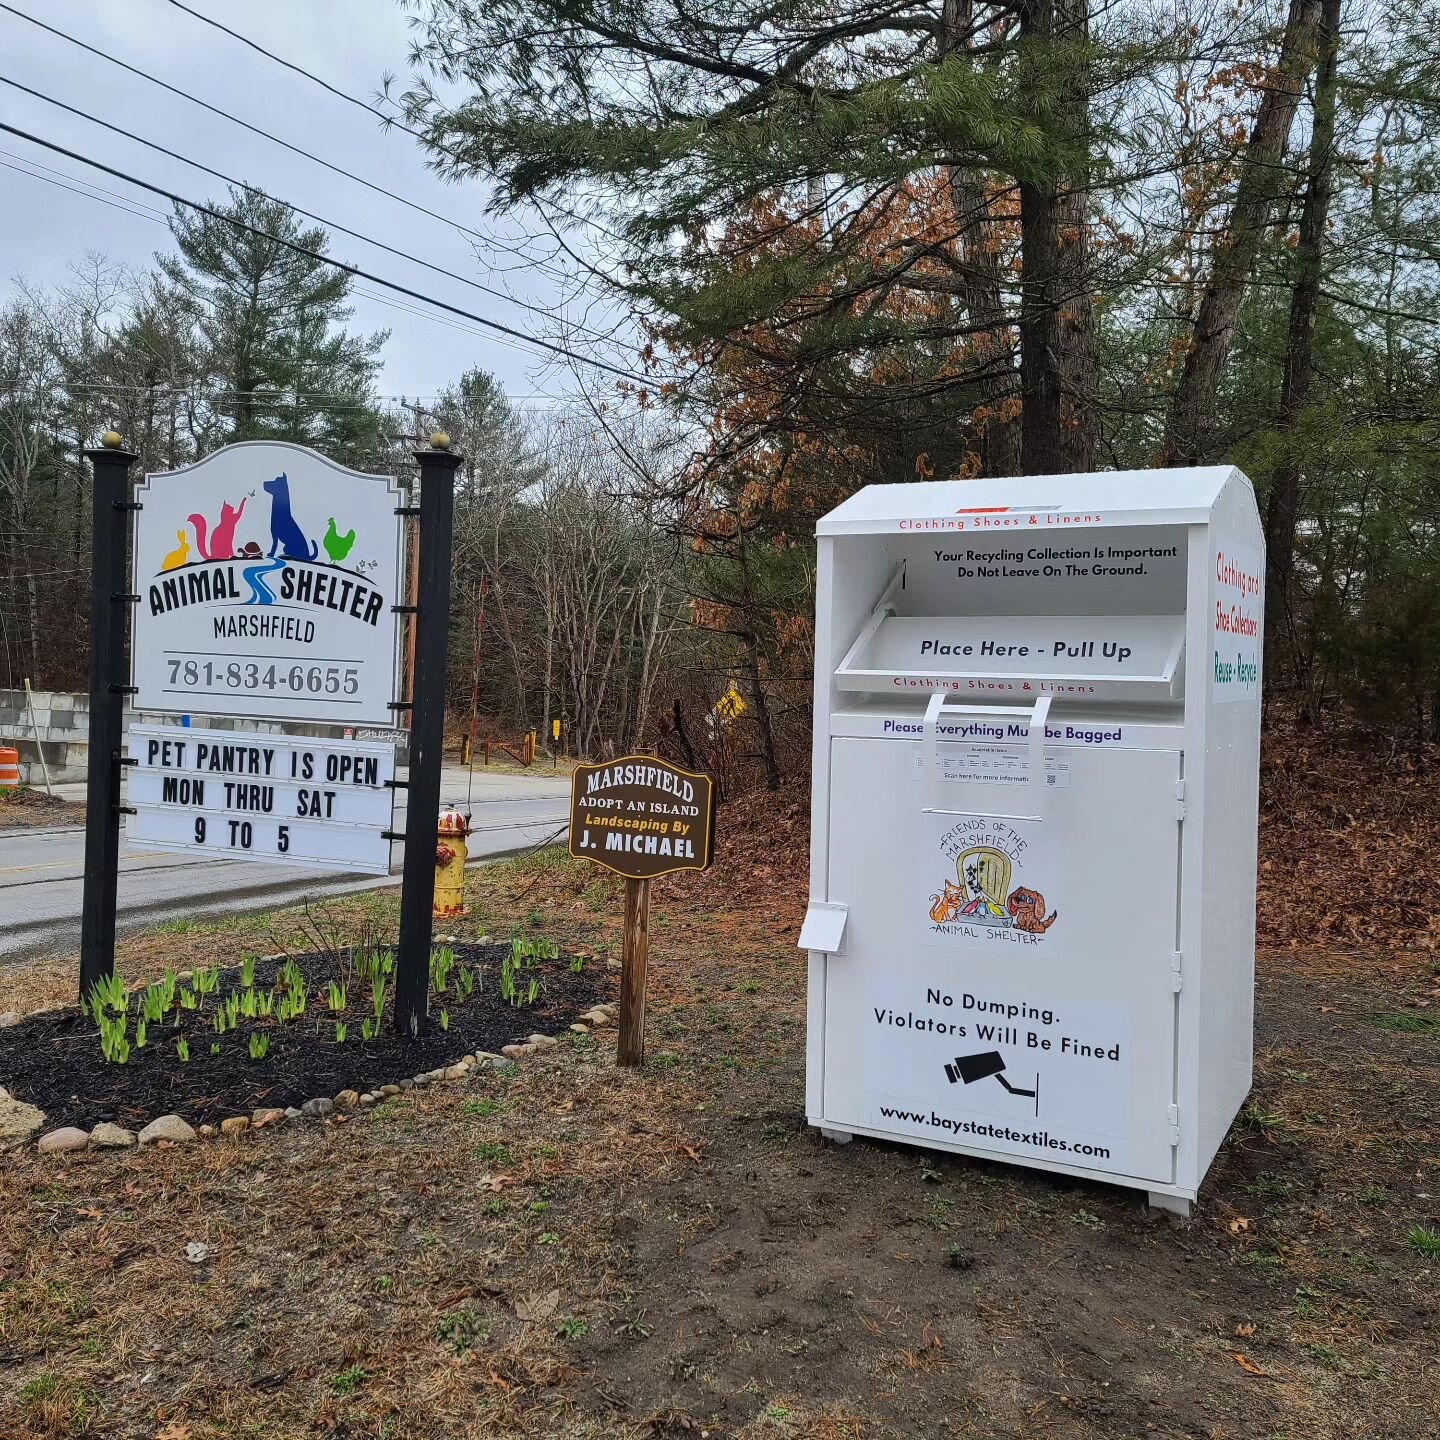 TEXTILE RECYCLING BIN now at the Marshfield Animal Shelter (156 Clay Pit Road). Proceeds benefit  Friends of the Marshfield Animal Shelter. 

Mattresses, couch or lawn cushions, any foam products such as mattress pads, and carpet remnants larger than